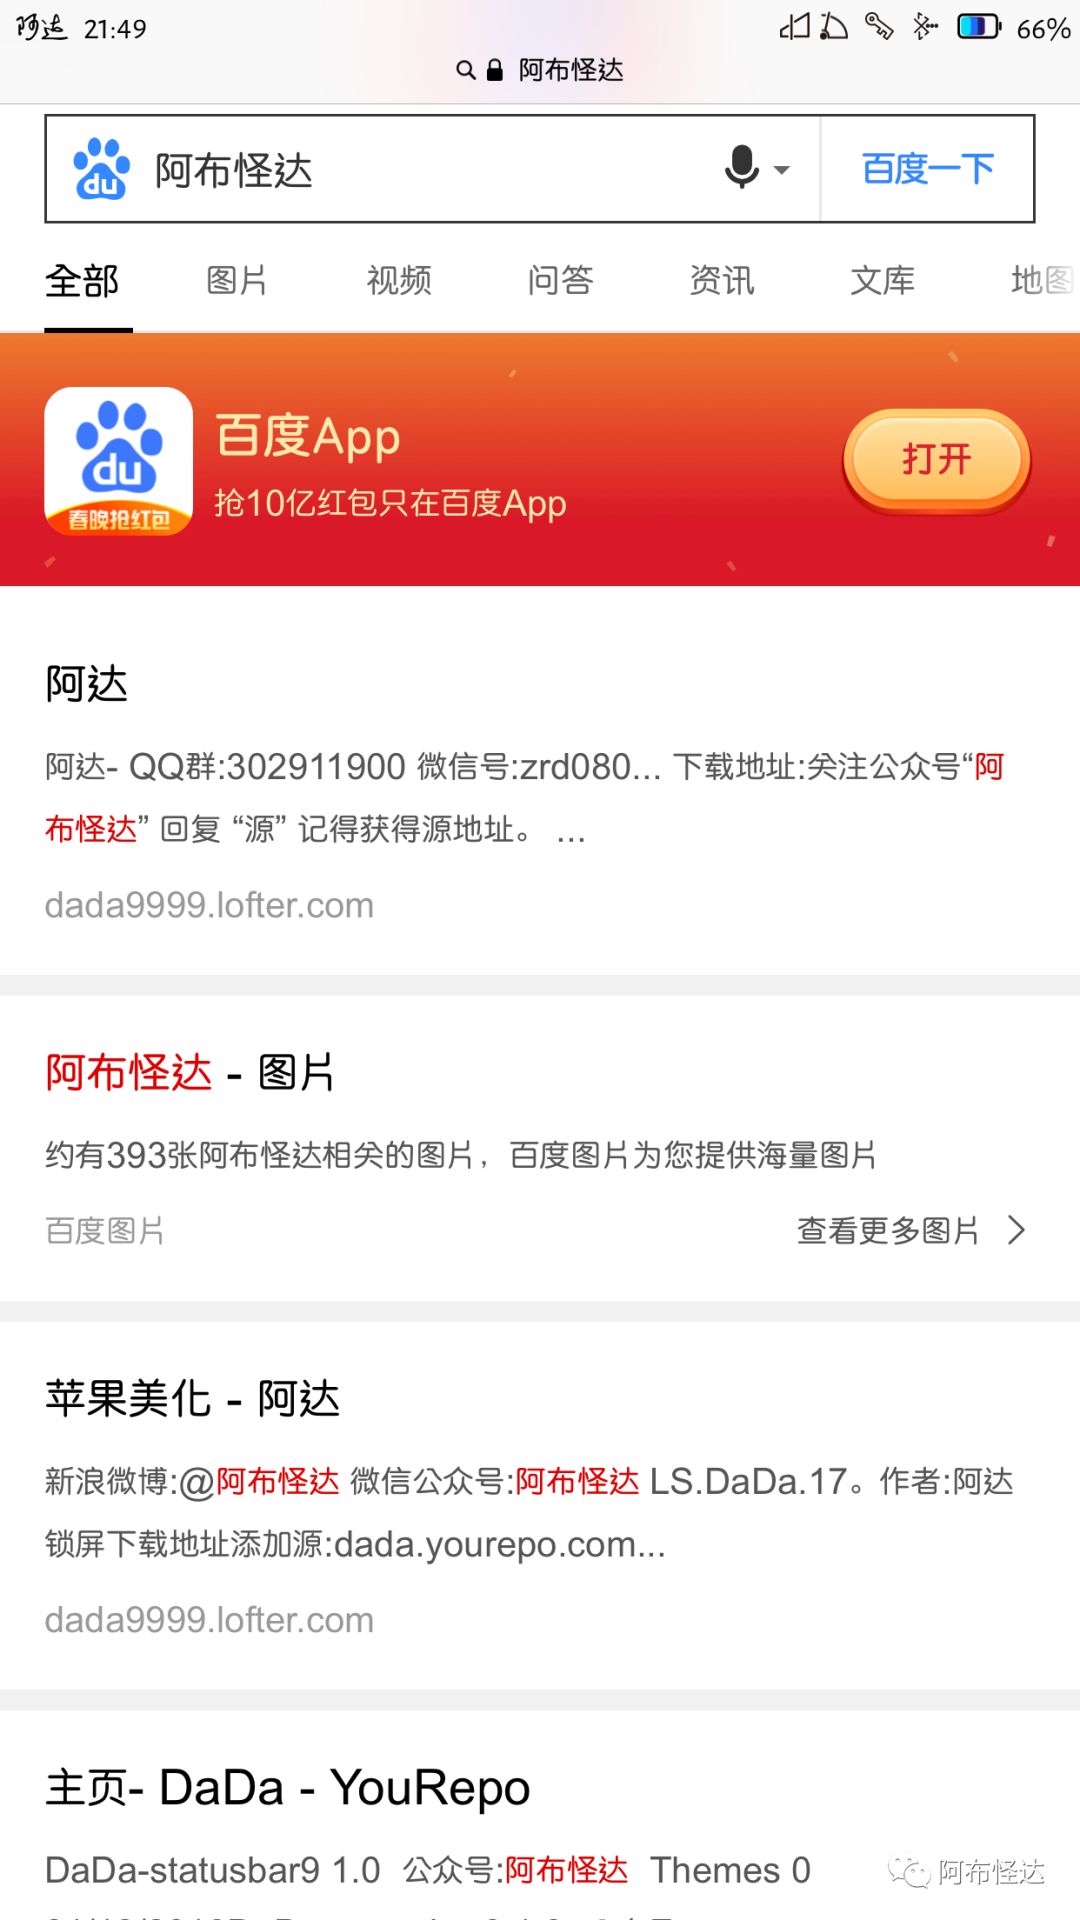 Large collection of iOS9/10/11/12 jailbreak Chinese fonts